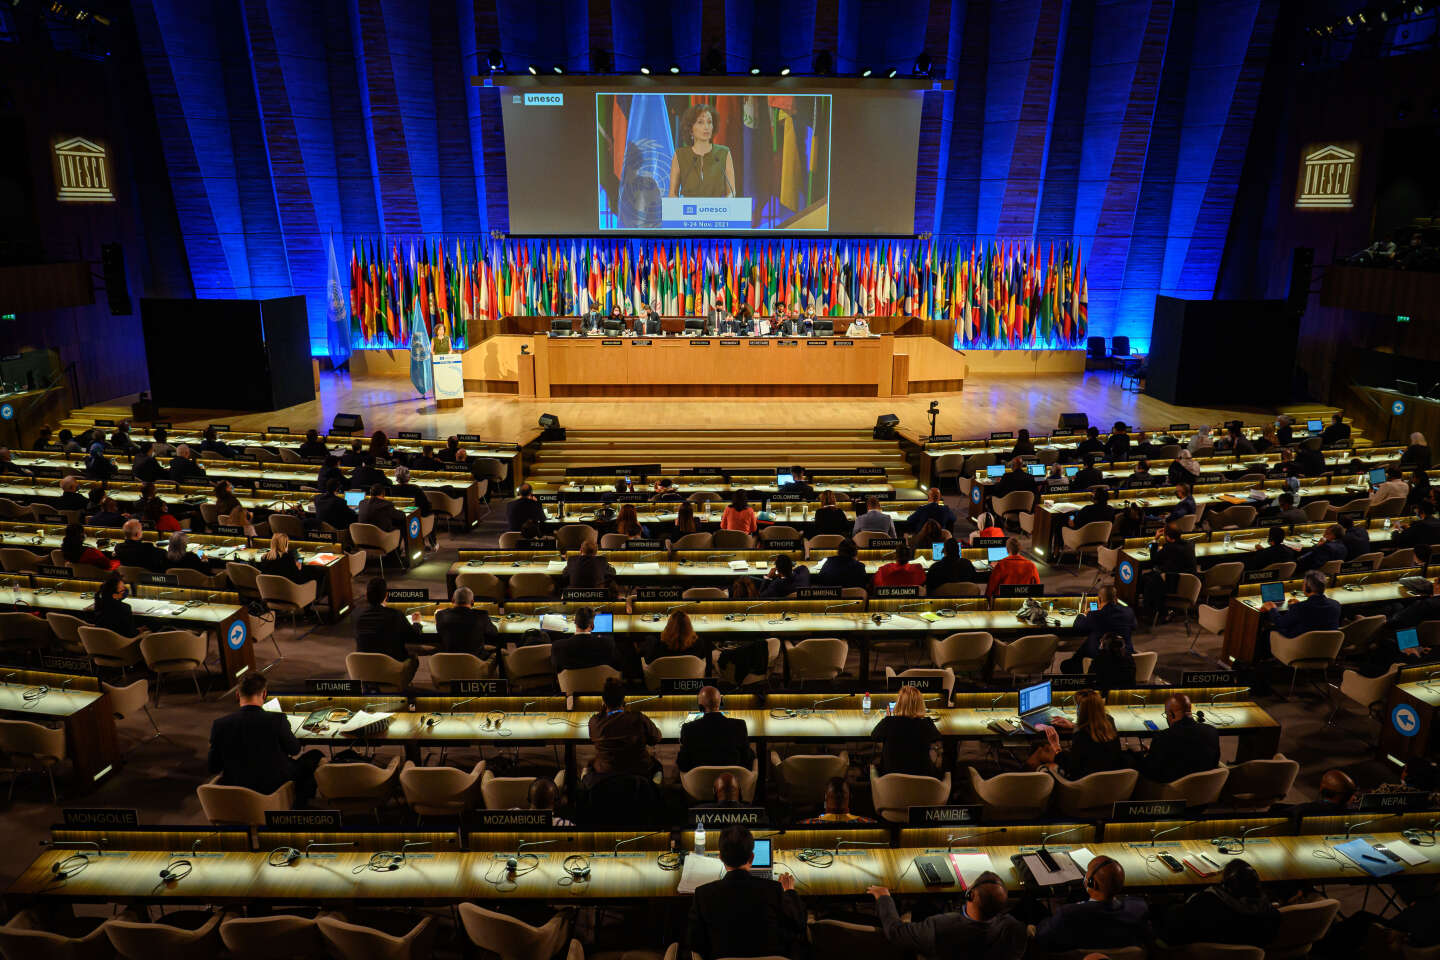 Six years after leaving, the US is ready to rejoin UNESCO and pay its dues